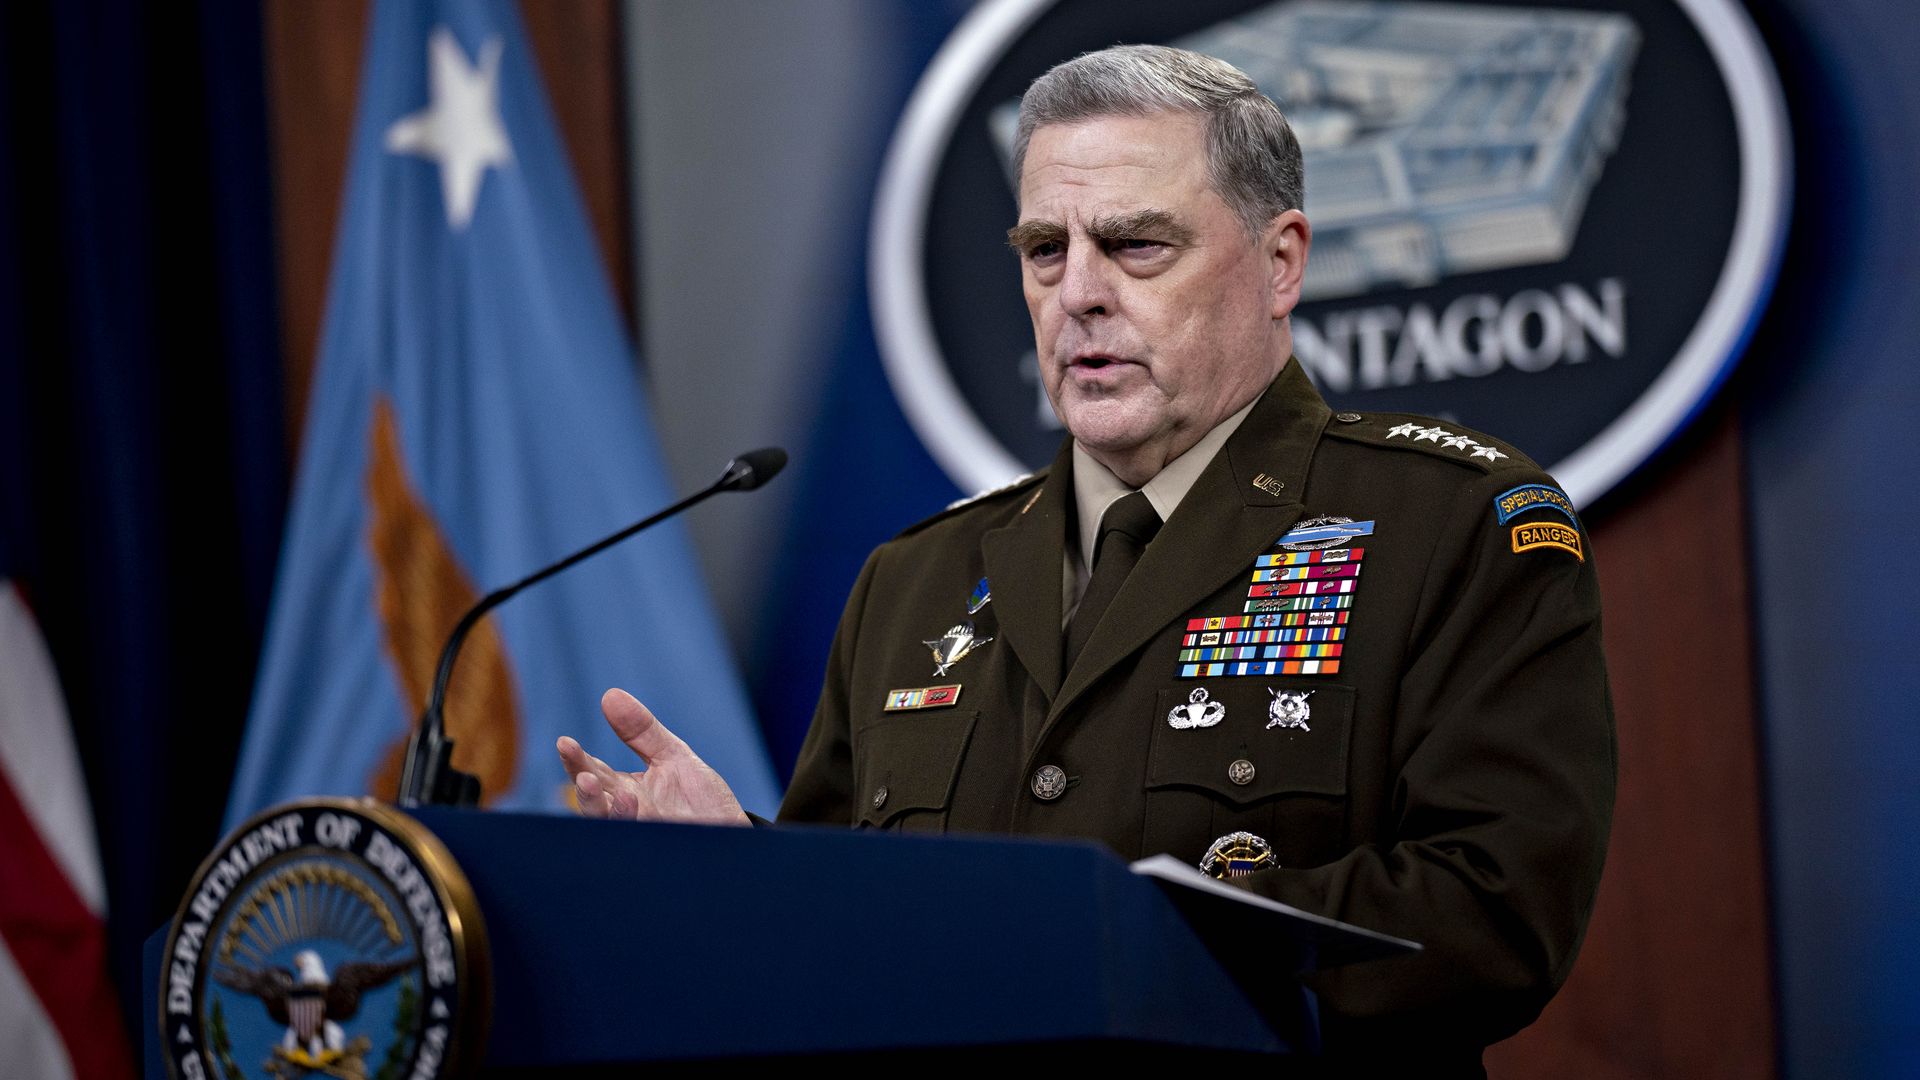 Mark Milley, chairman of the joint chiefs of staff, speaks during a news conference at the Pentagon in Arlington, Virginia.